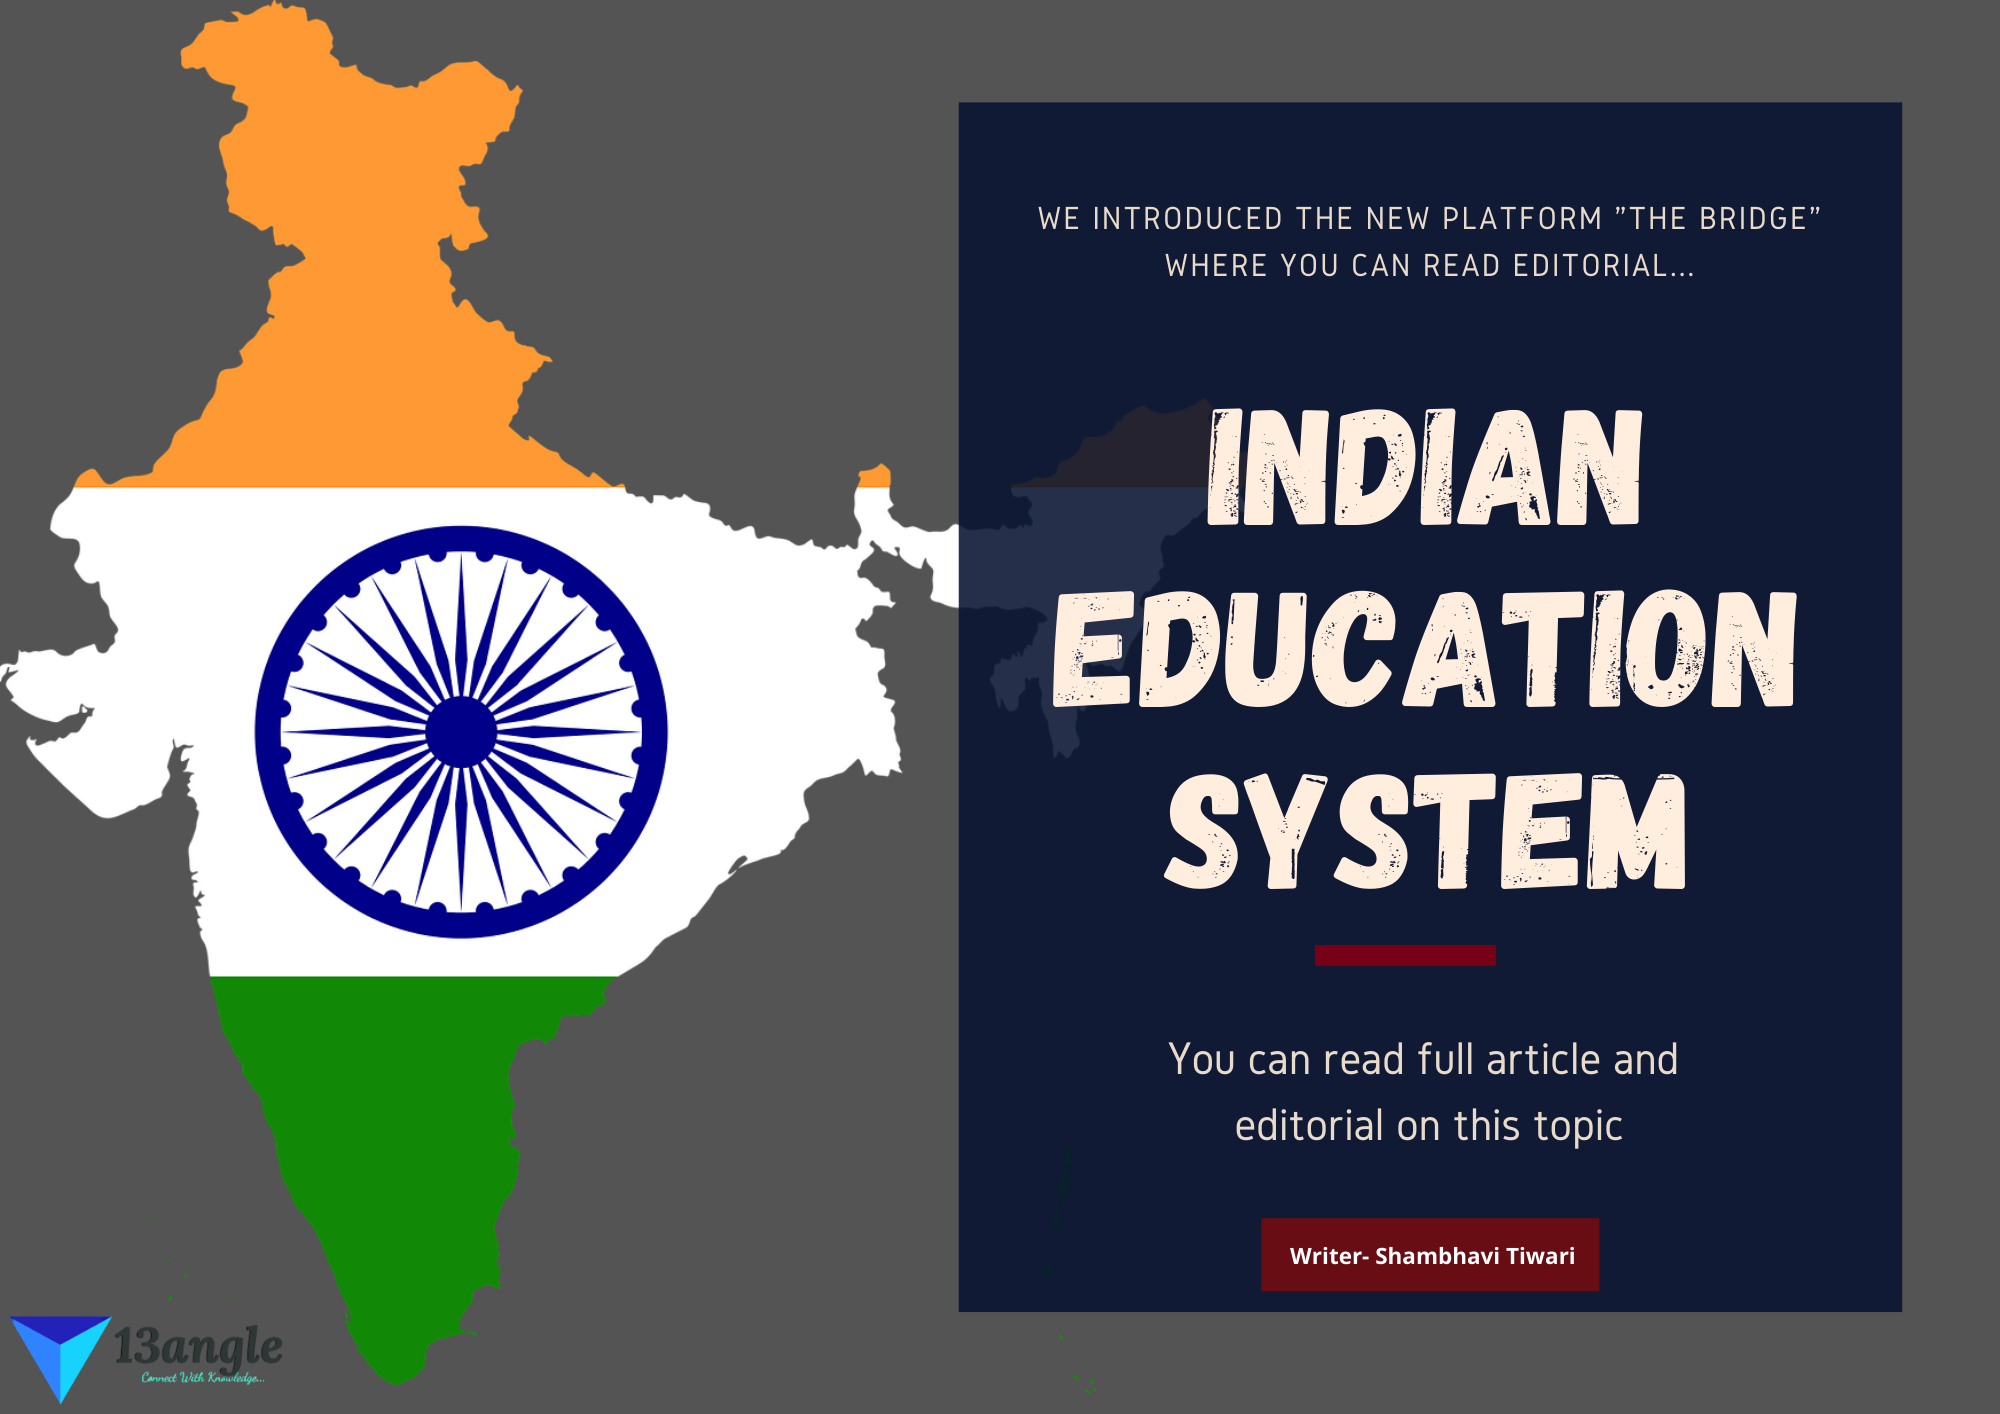 Indian Education System- 13angle.com